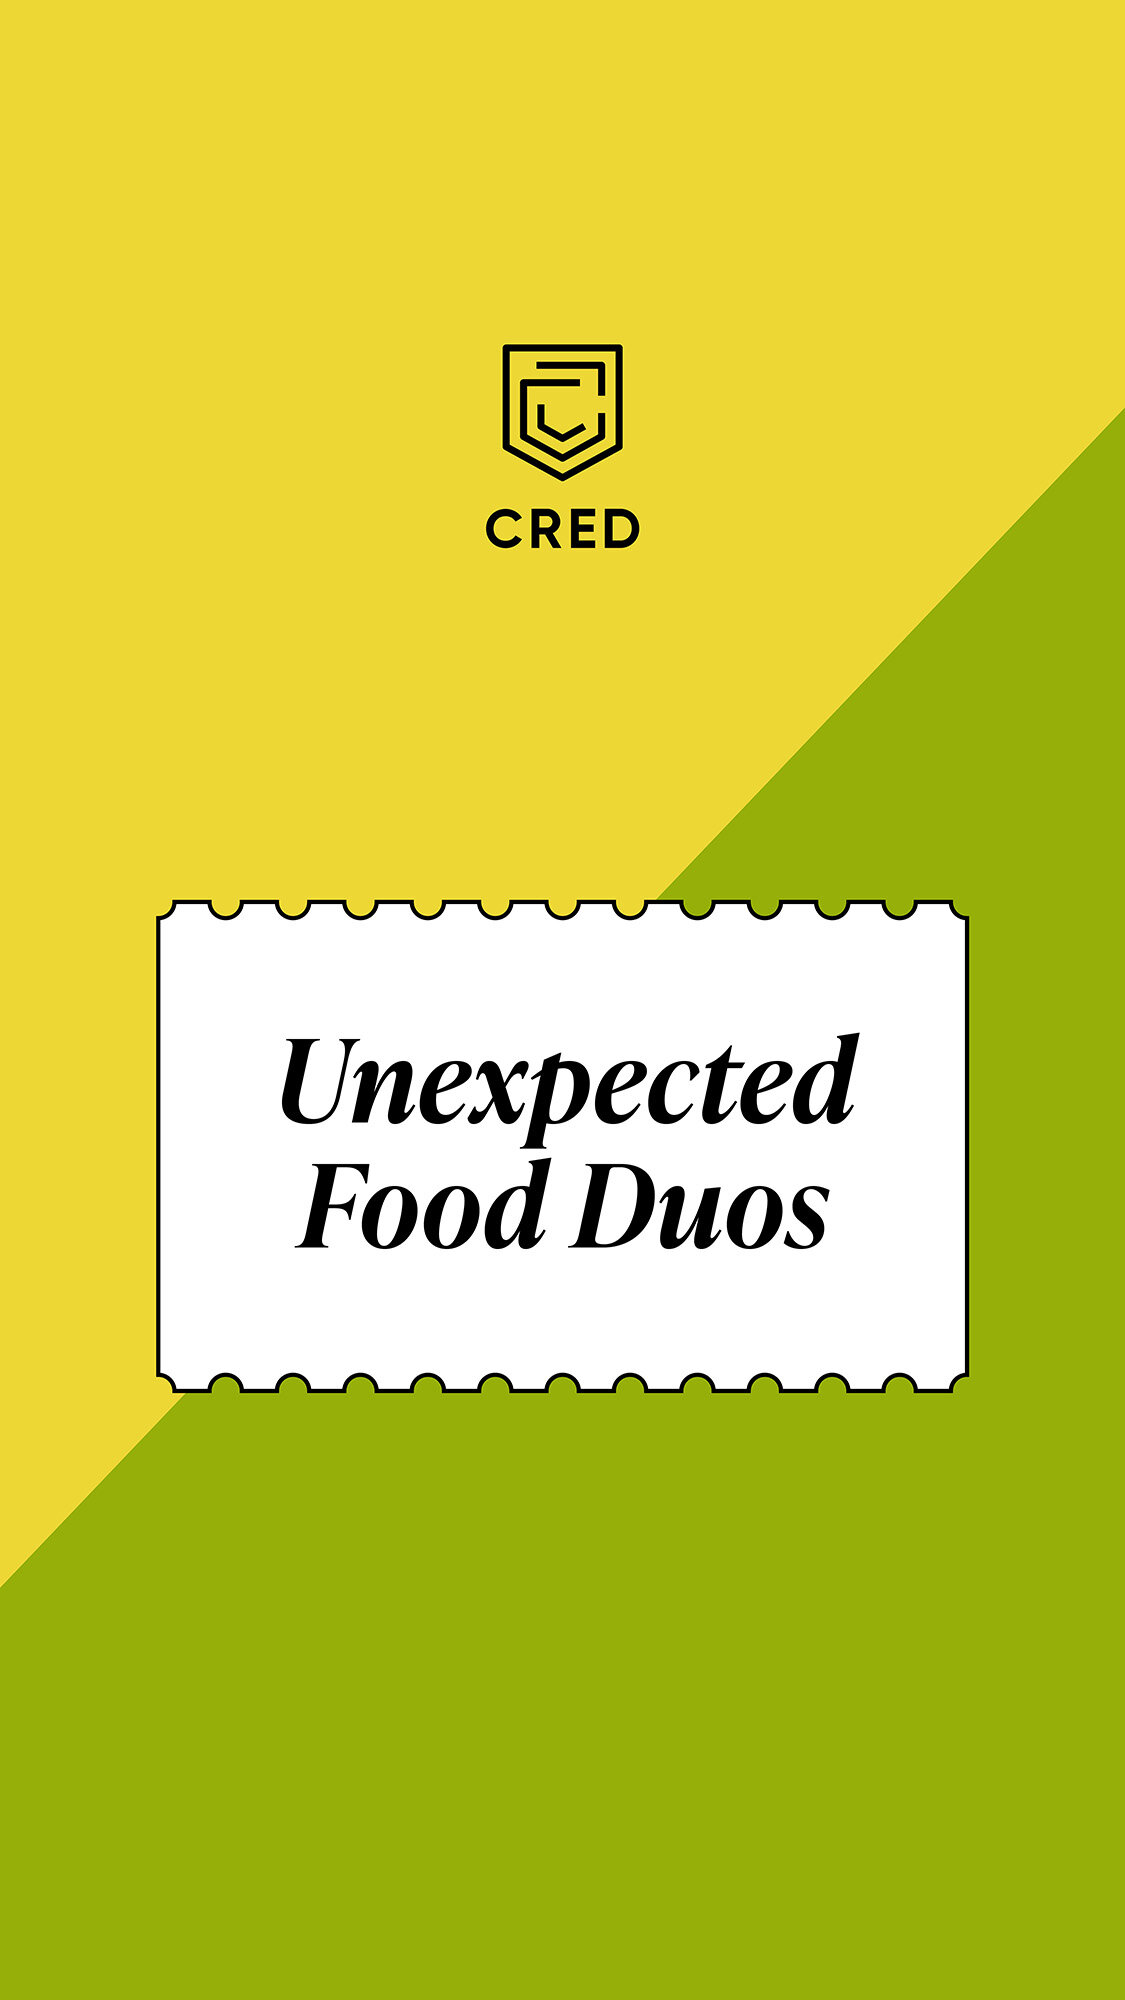 Copy of CRED_Duo_Story_FoodDuos_1.jpg